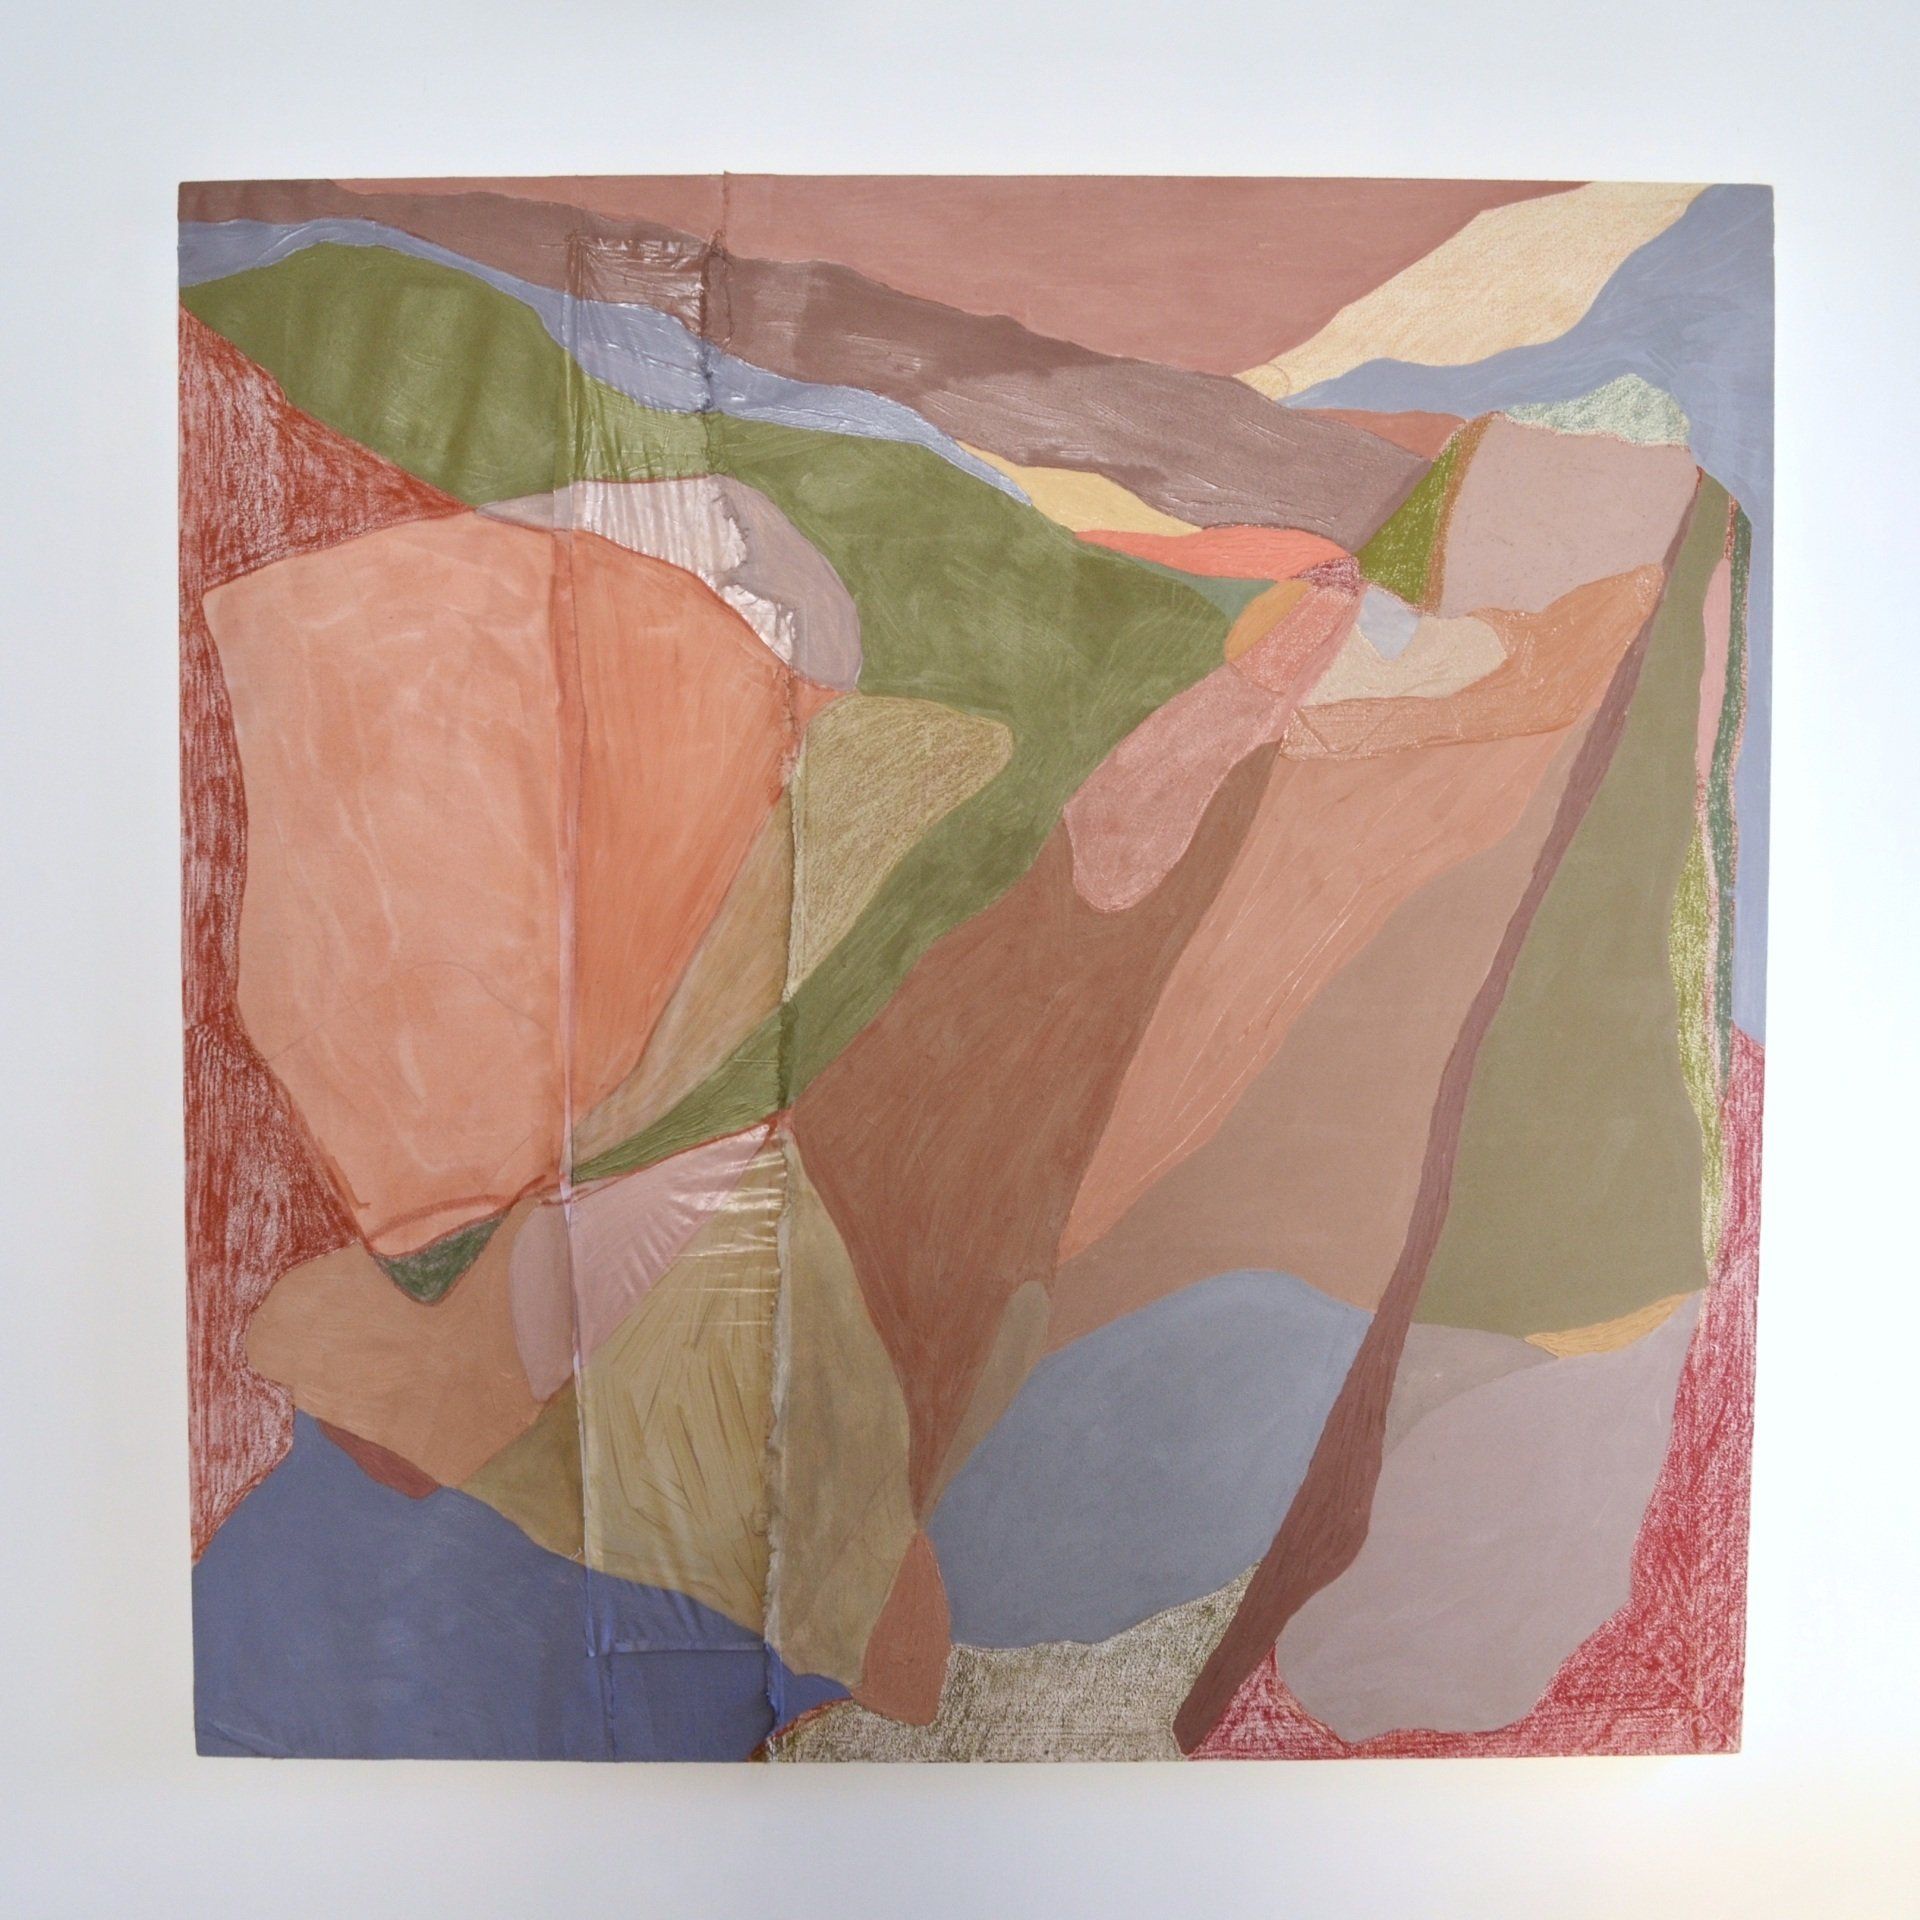 Square painting with abstract, colourful shapes in green, red and pink, hanging on white gallery wall